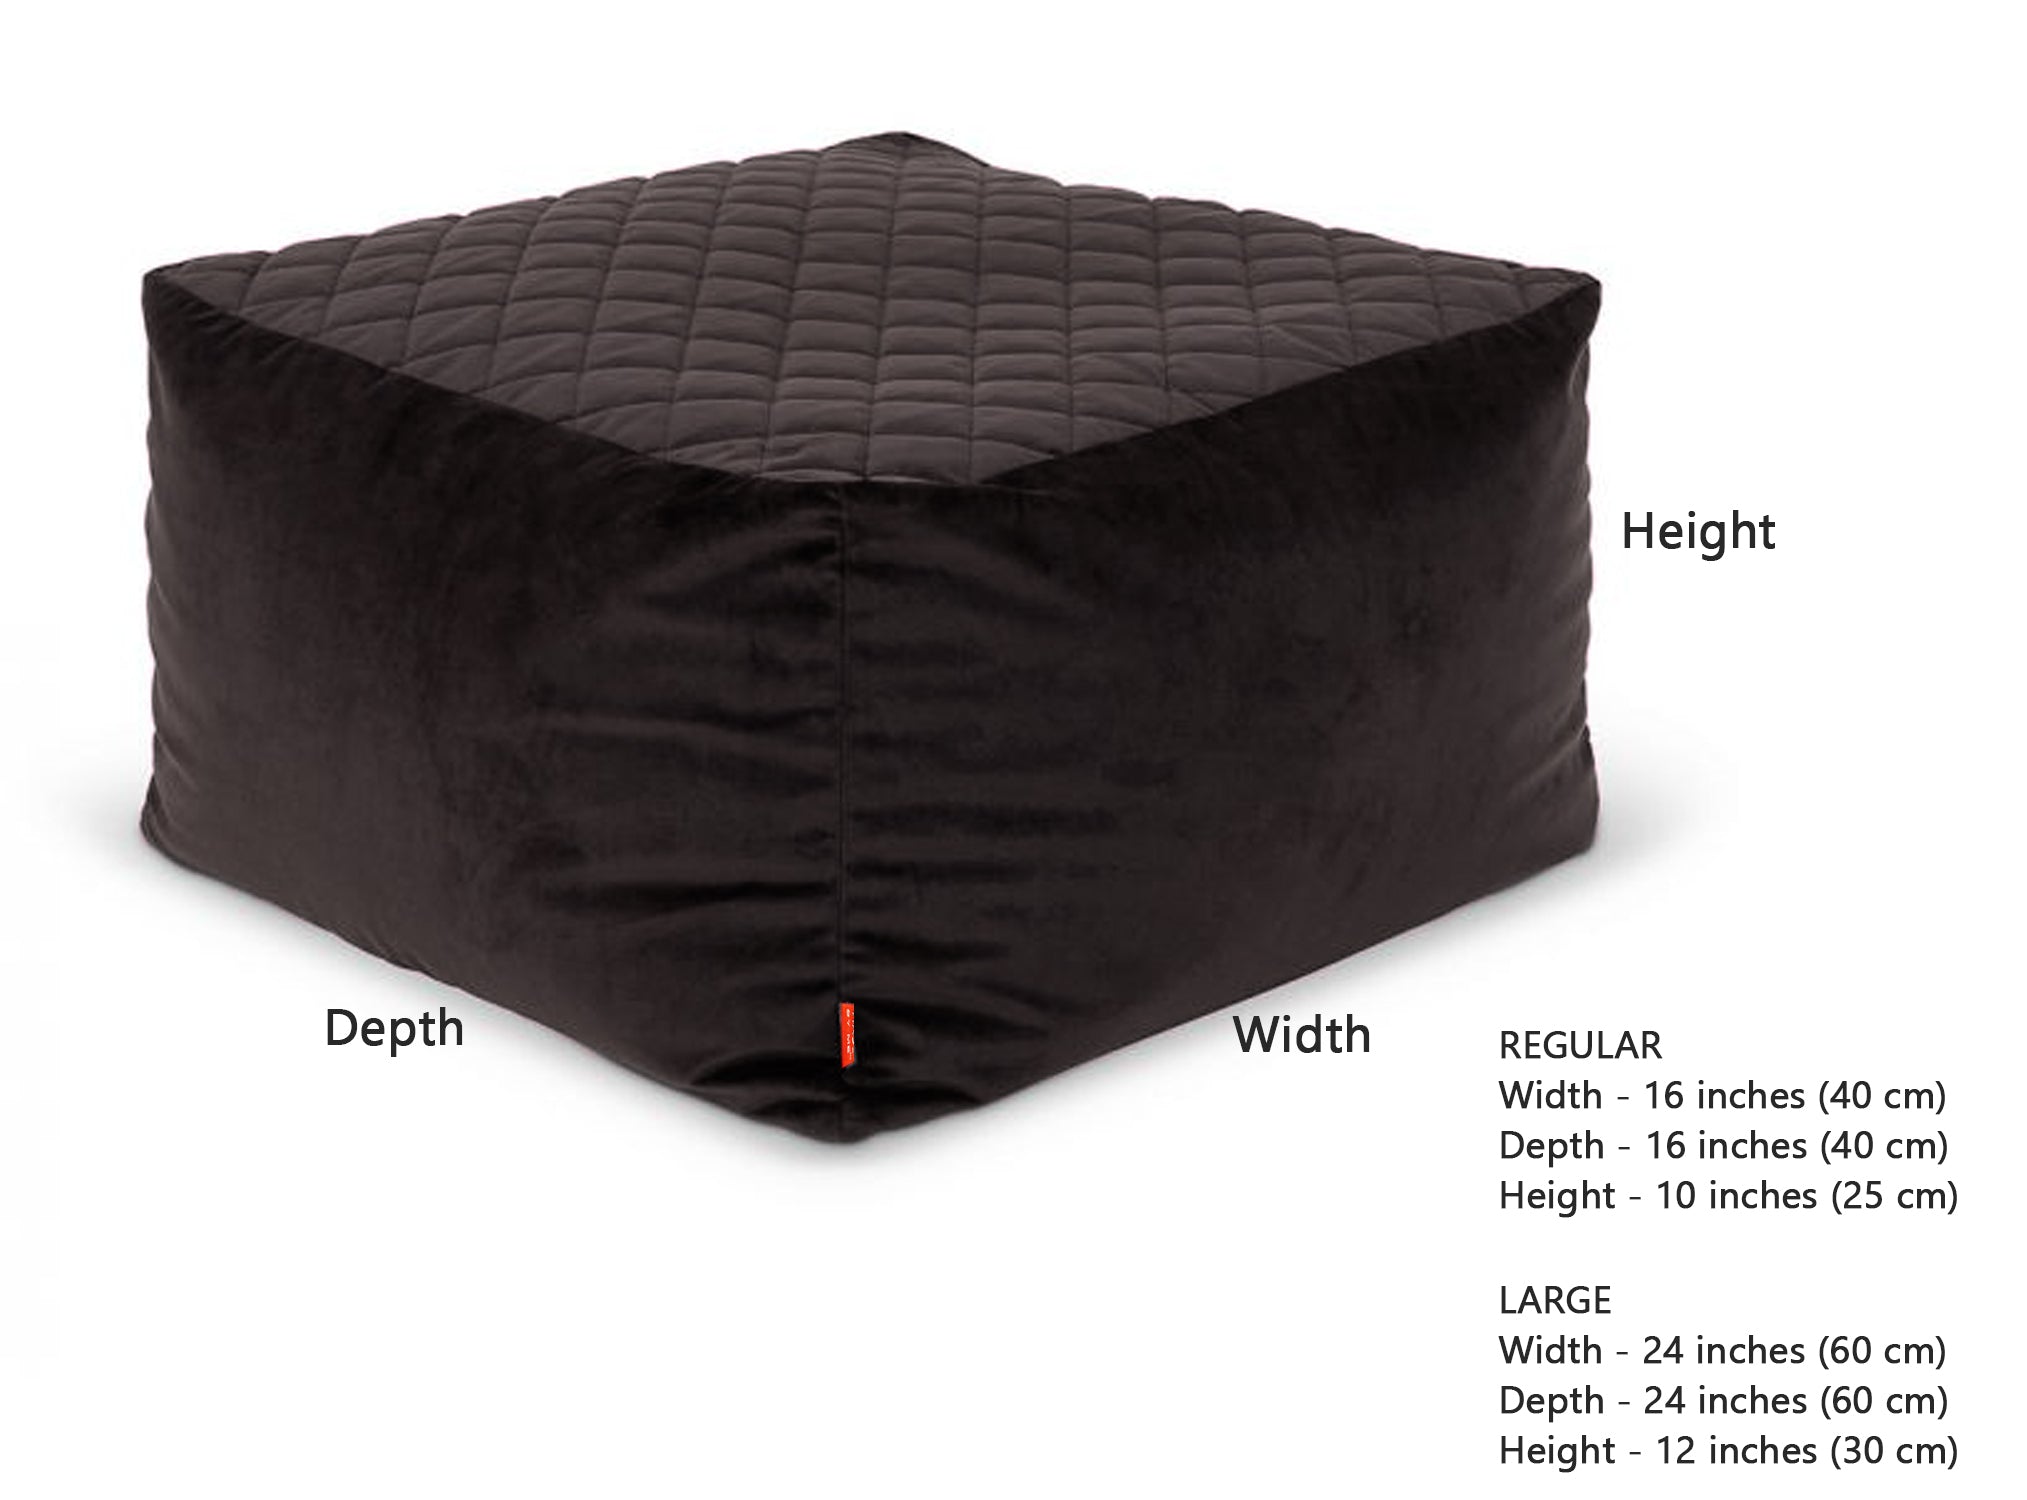 Amore Beaute pouf is made from upholstery grade heavy cotton velvet. 